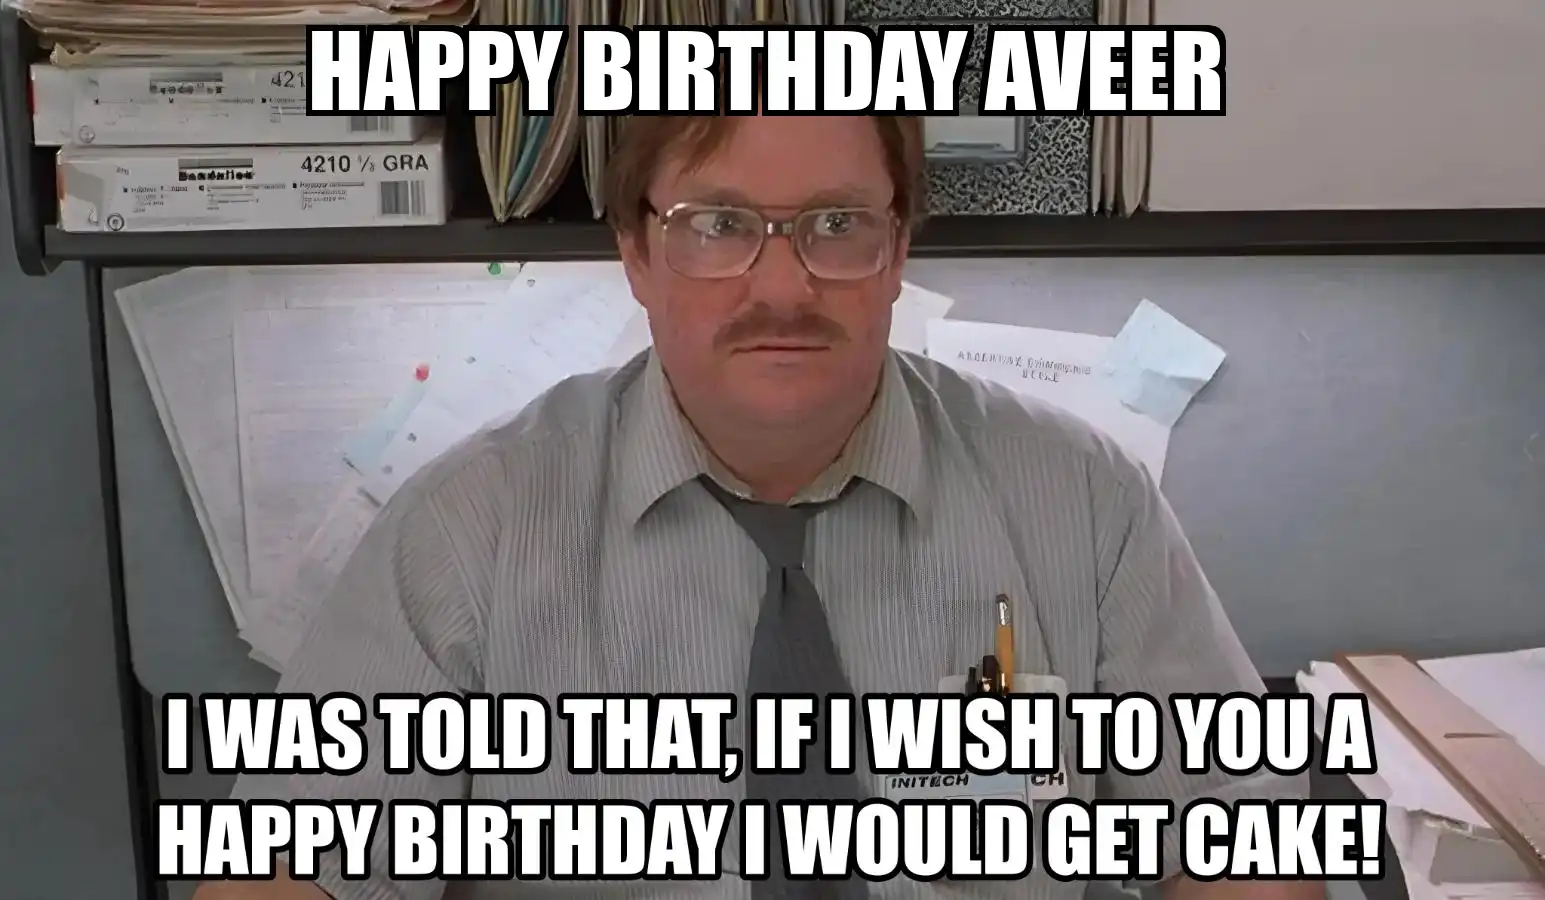 Happy Birthday Aveer I Would Get A Cake Meme